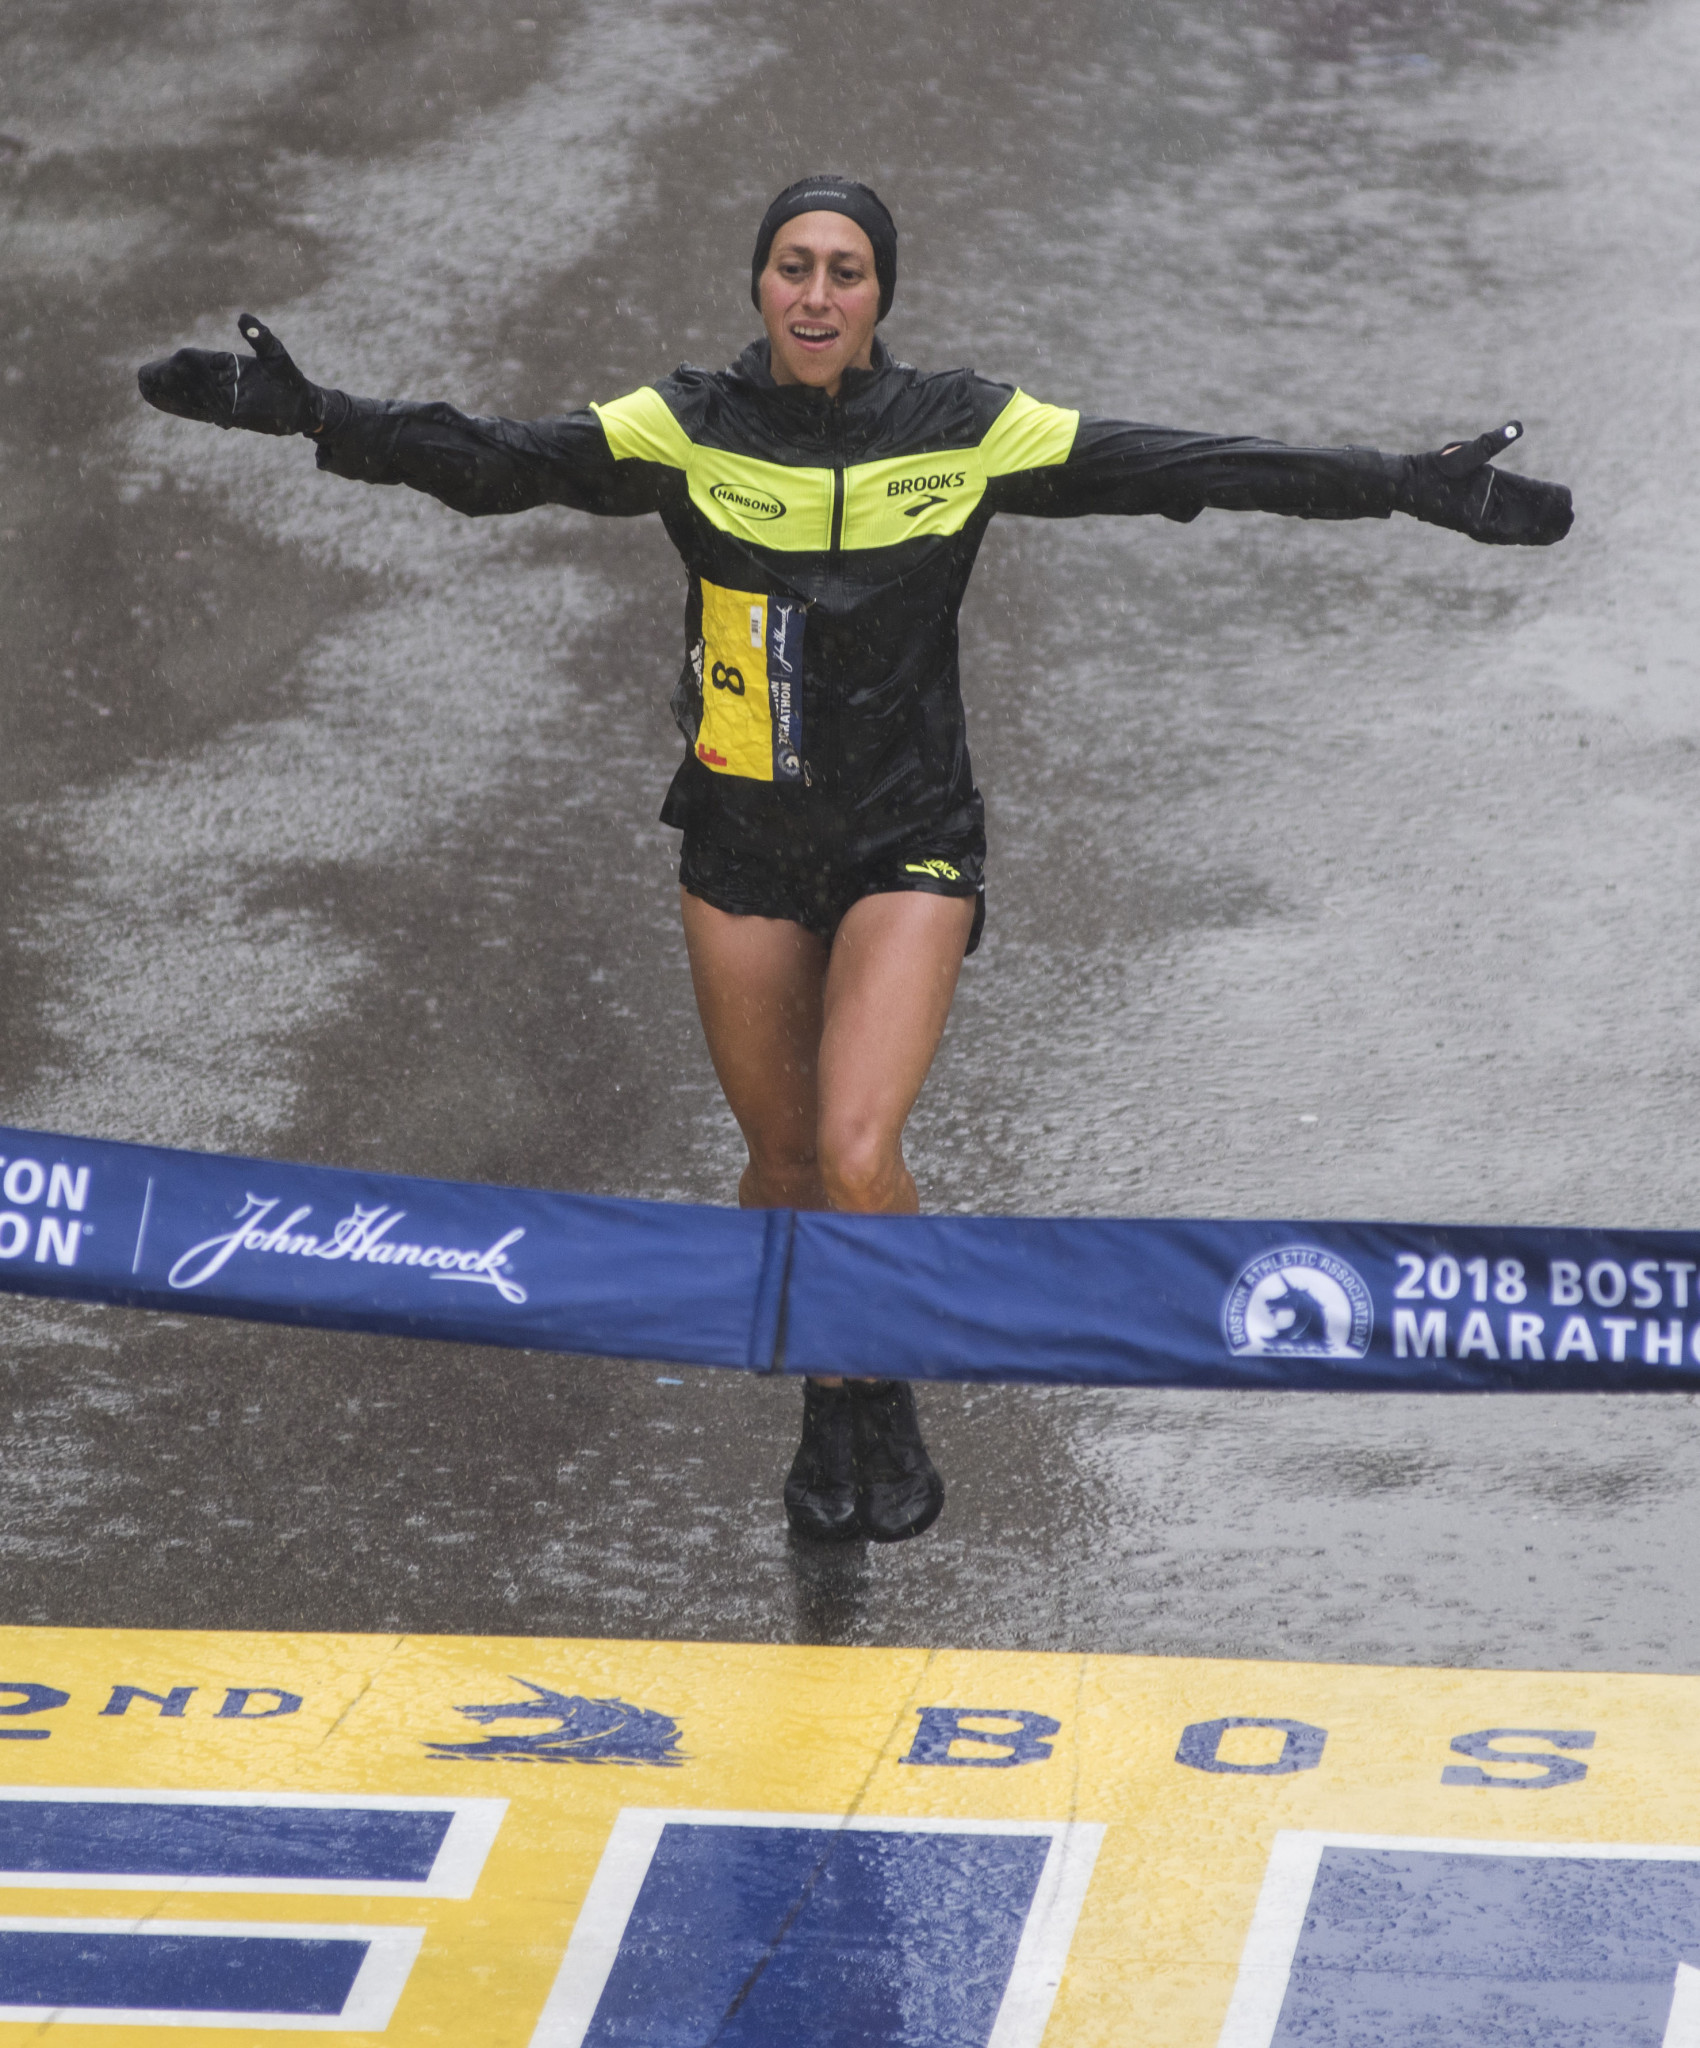 Raining champion - seven years after missing the Boston Marathon title by two seconds, Desiree Linden takes the prize ©Getty Images